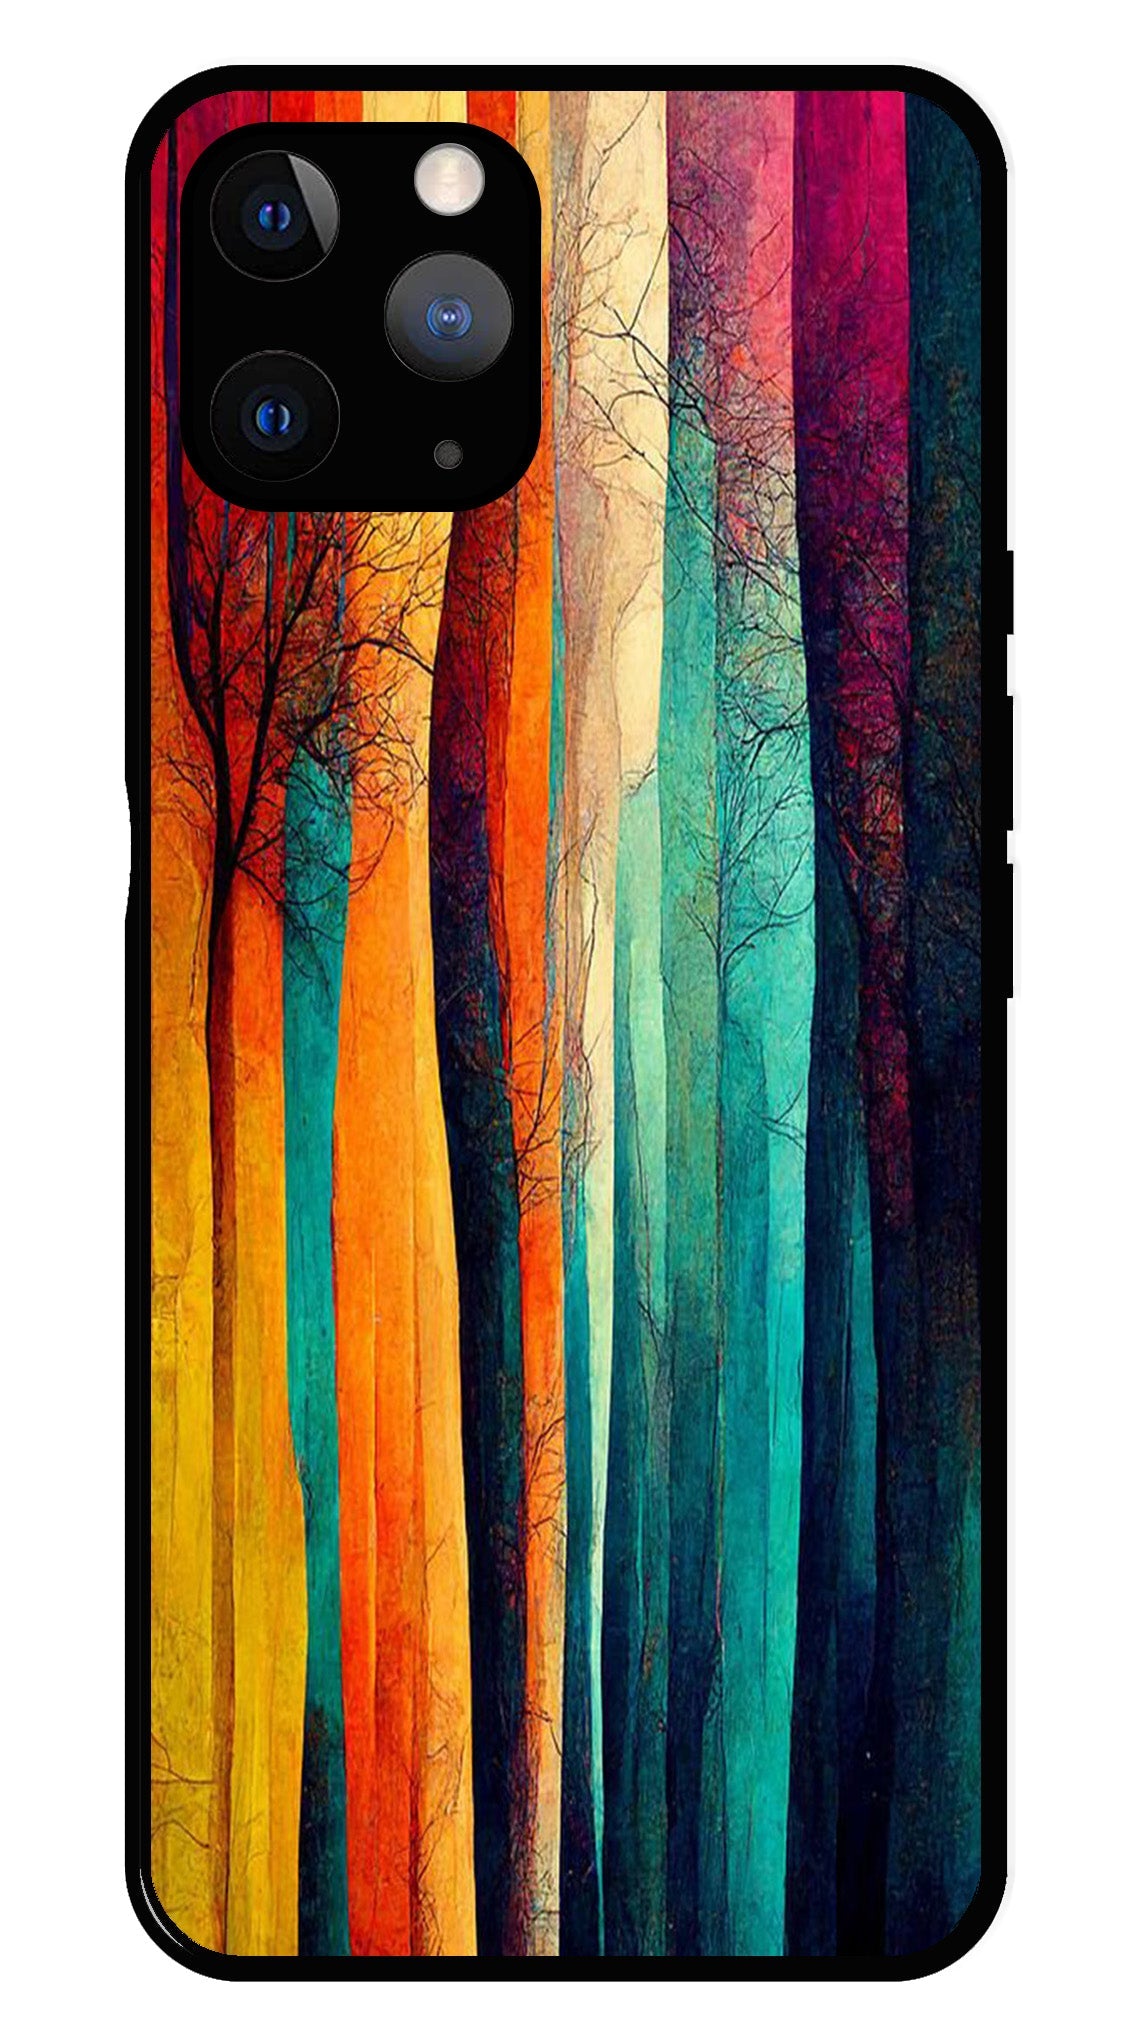 Modern Art Colorful Metal Mobile Case for iPhone 11 Pro